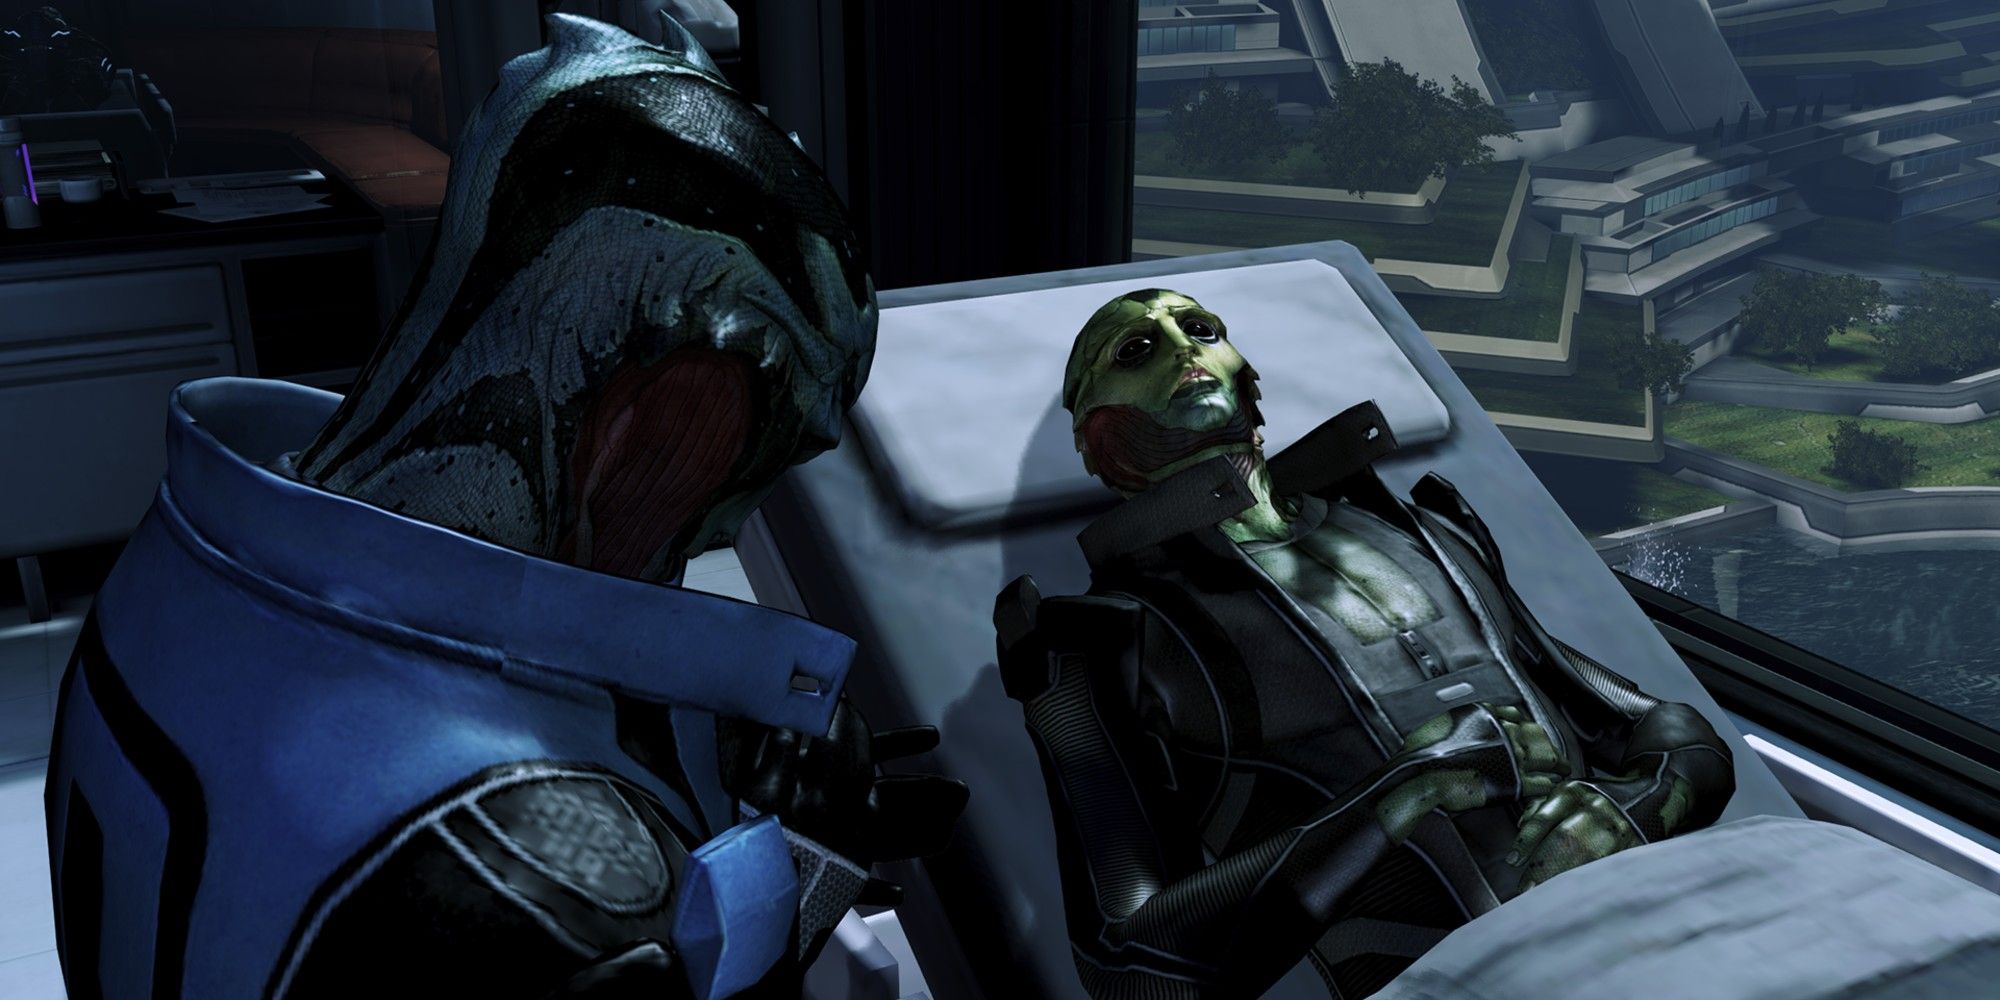 Thane slowly dying in a hospital with his son.